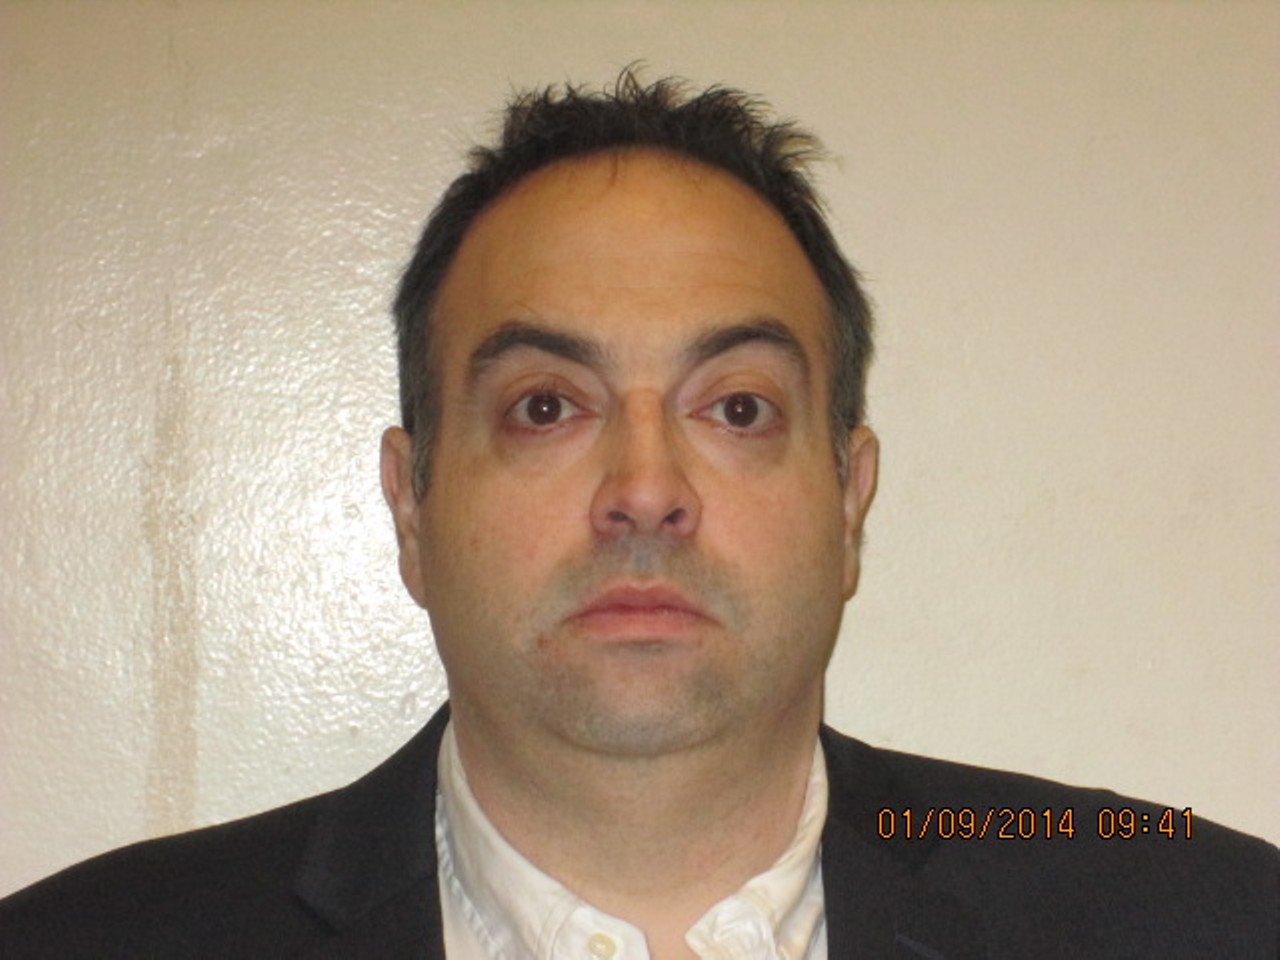 The law director's booking photo after his corruption arrest.